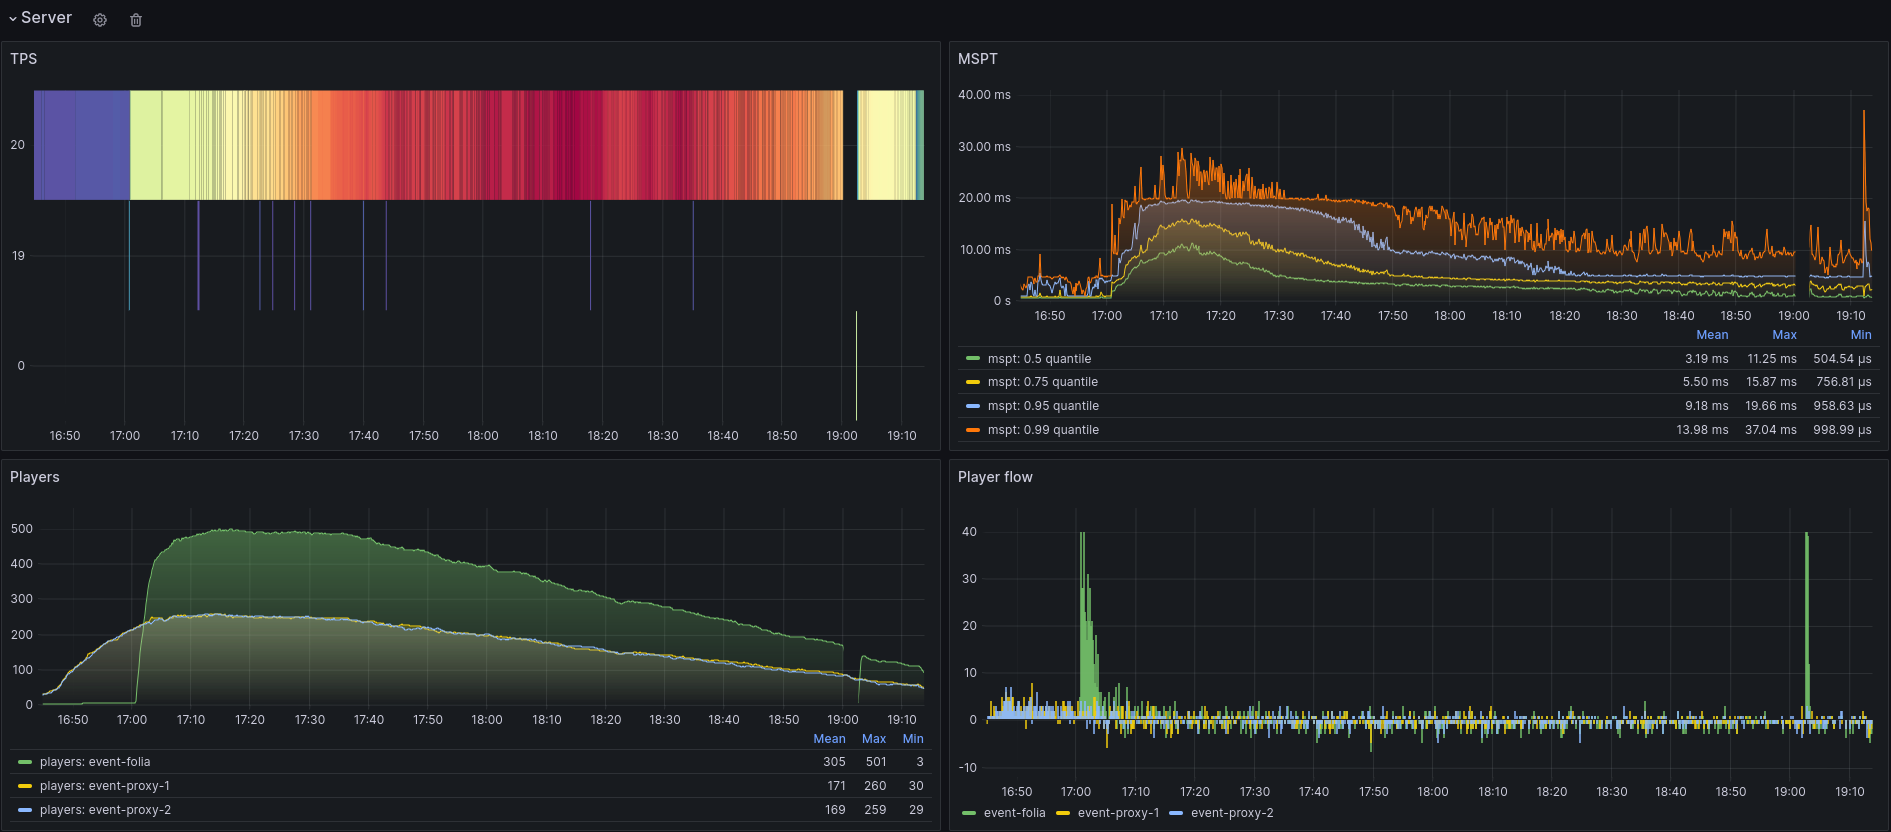 A Grafana screenshot showing basic server performance and player flow.